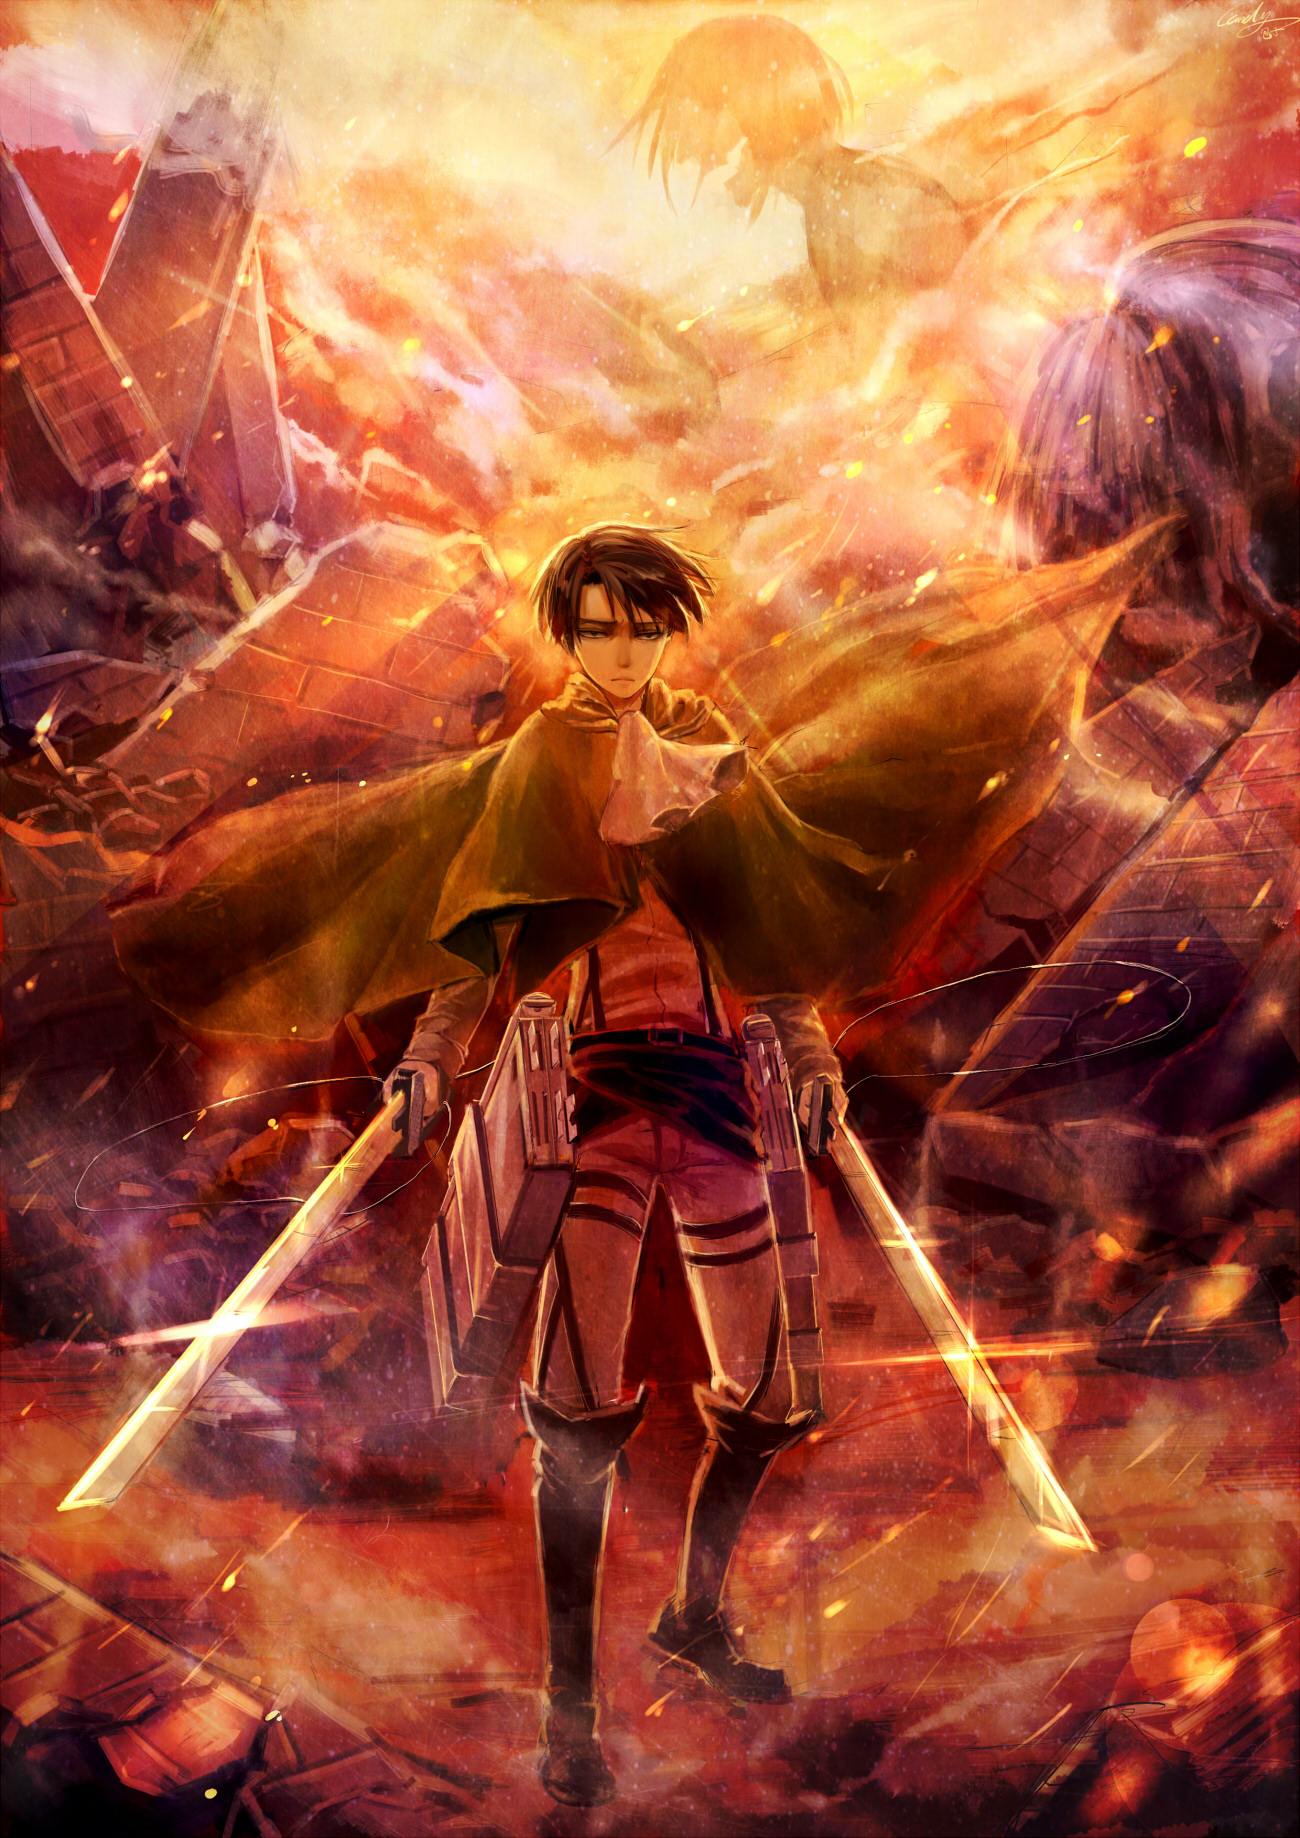 attack on titan phone Wallpapers